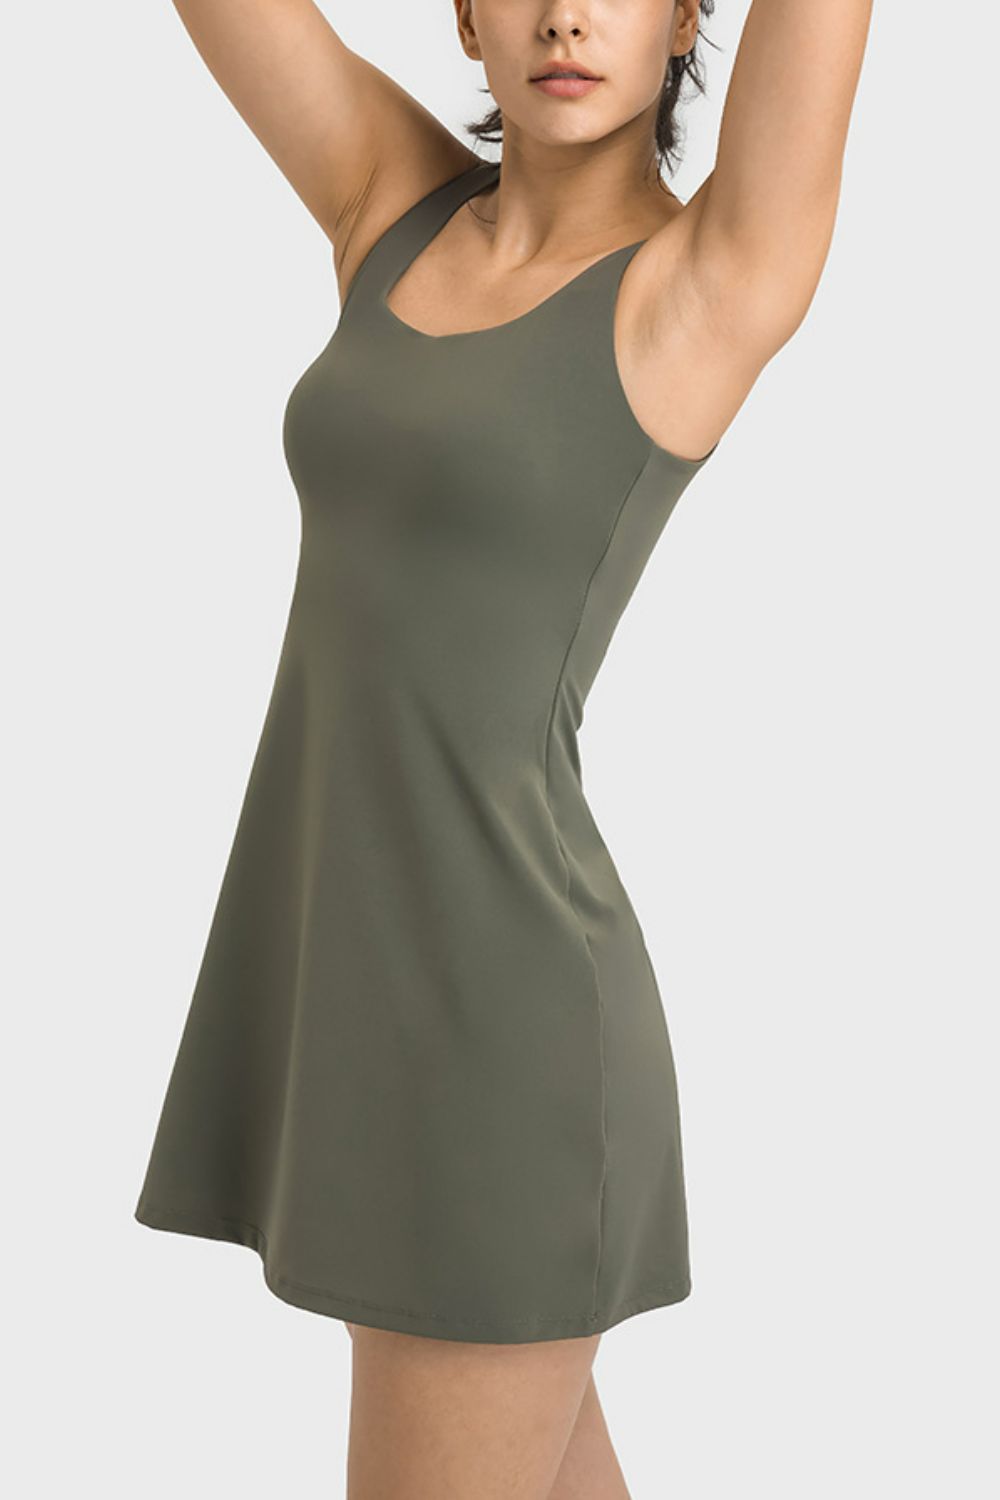 Women’s Square Neck Sports Tank Dress with Full Coverage Bottoms